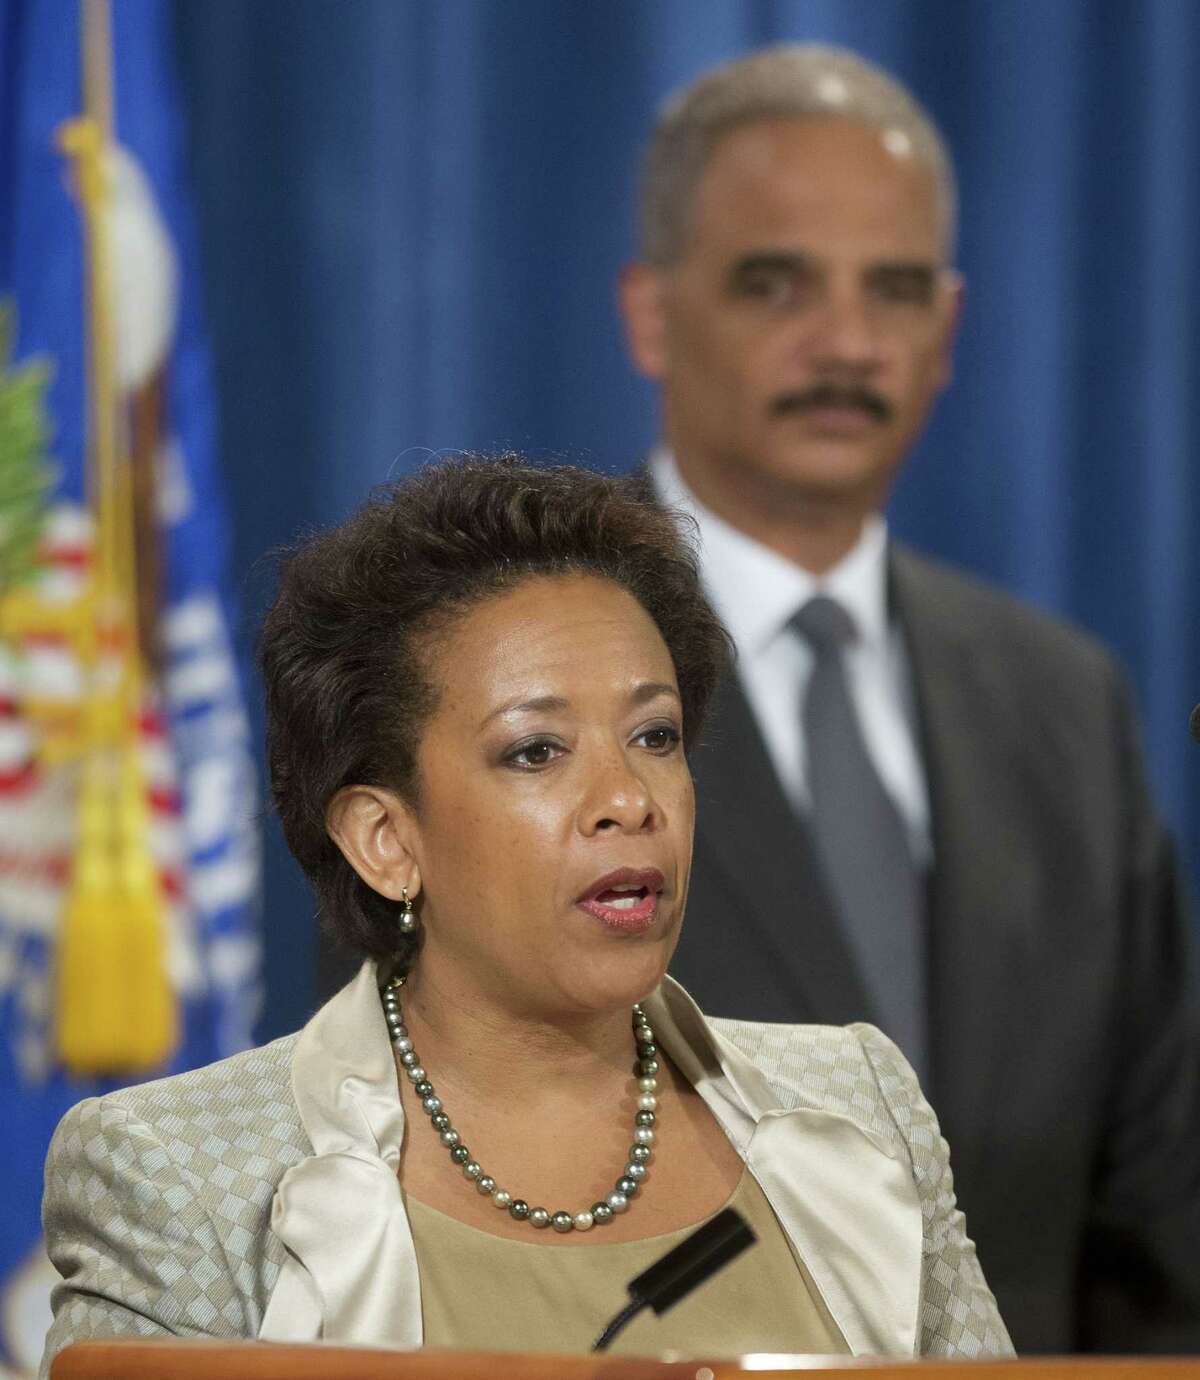 In this July 28, 2014 file photo, Attorney General Eric Holder, right, listens to, Loretta Lynch, left, U.S. Attorney for the Eastern District of New York speaks during a news conference at the Justice Department in Washington. President Obama chose Lynch as attorney general on Friday, Nov. 7, 2014, which would make her the first black woman in the position